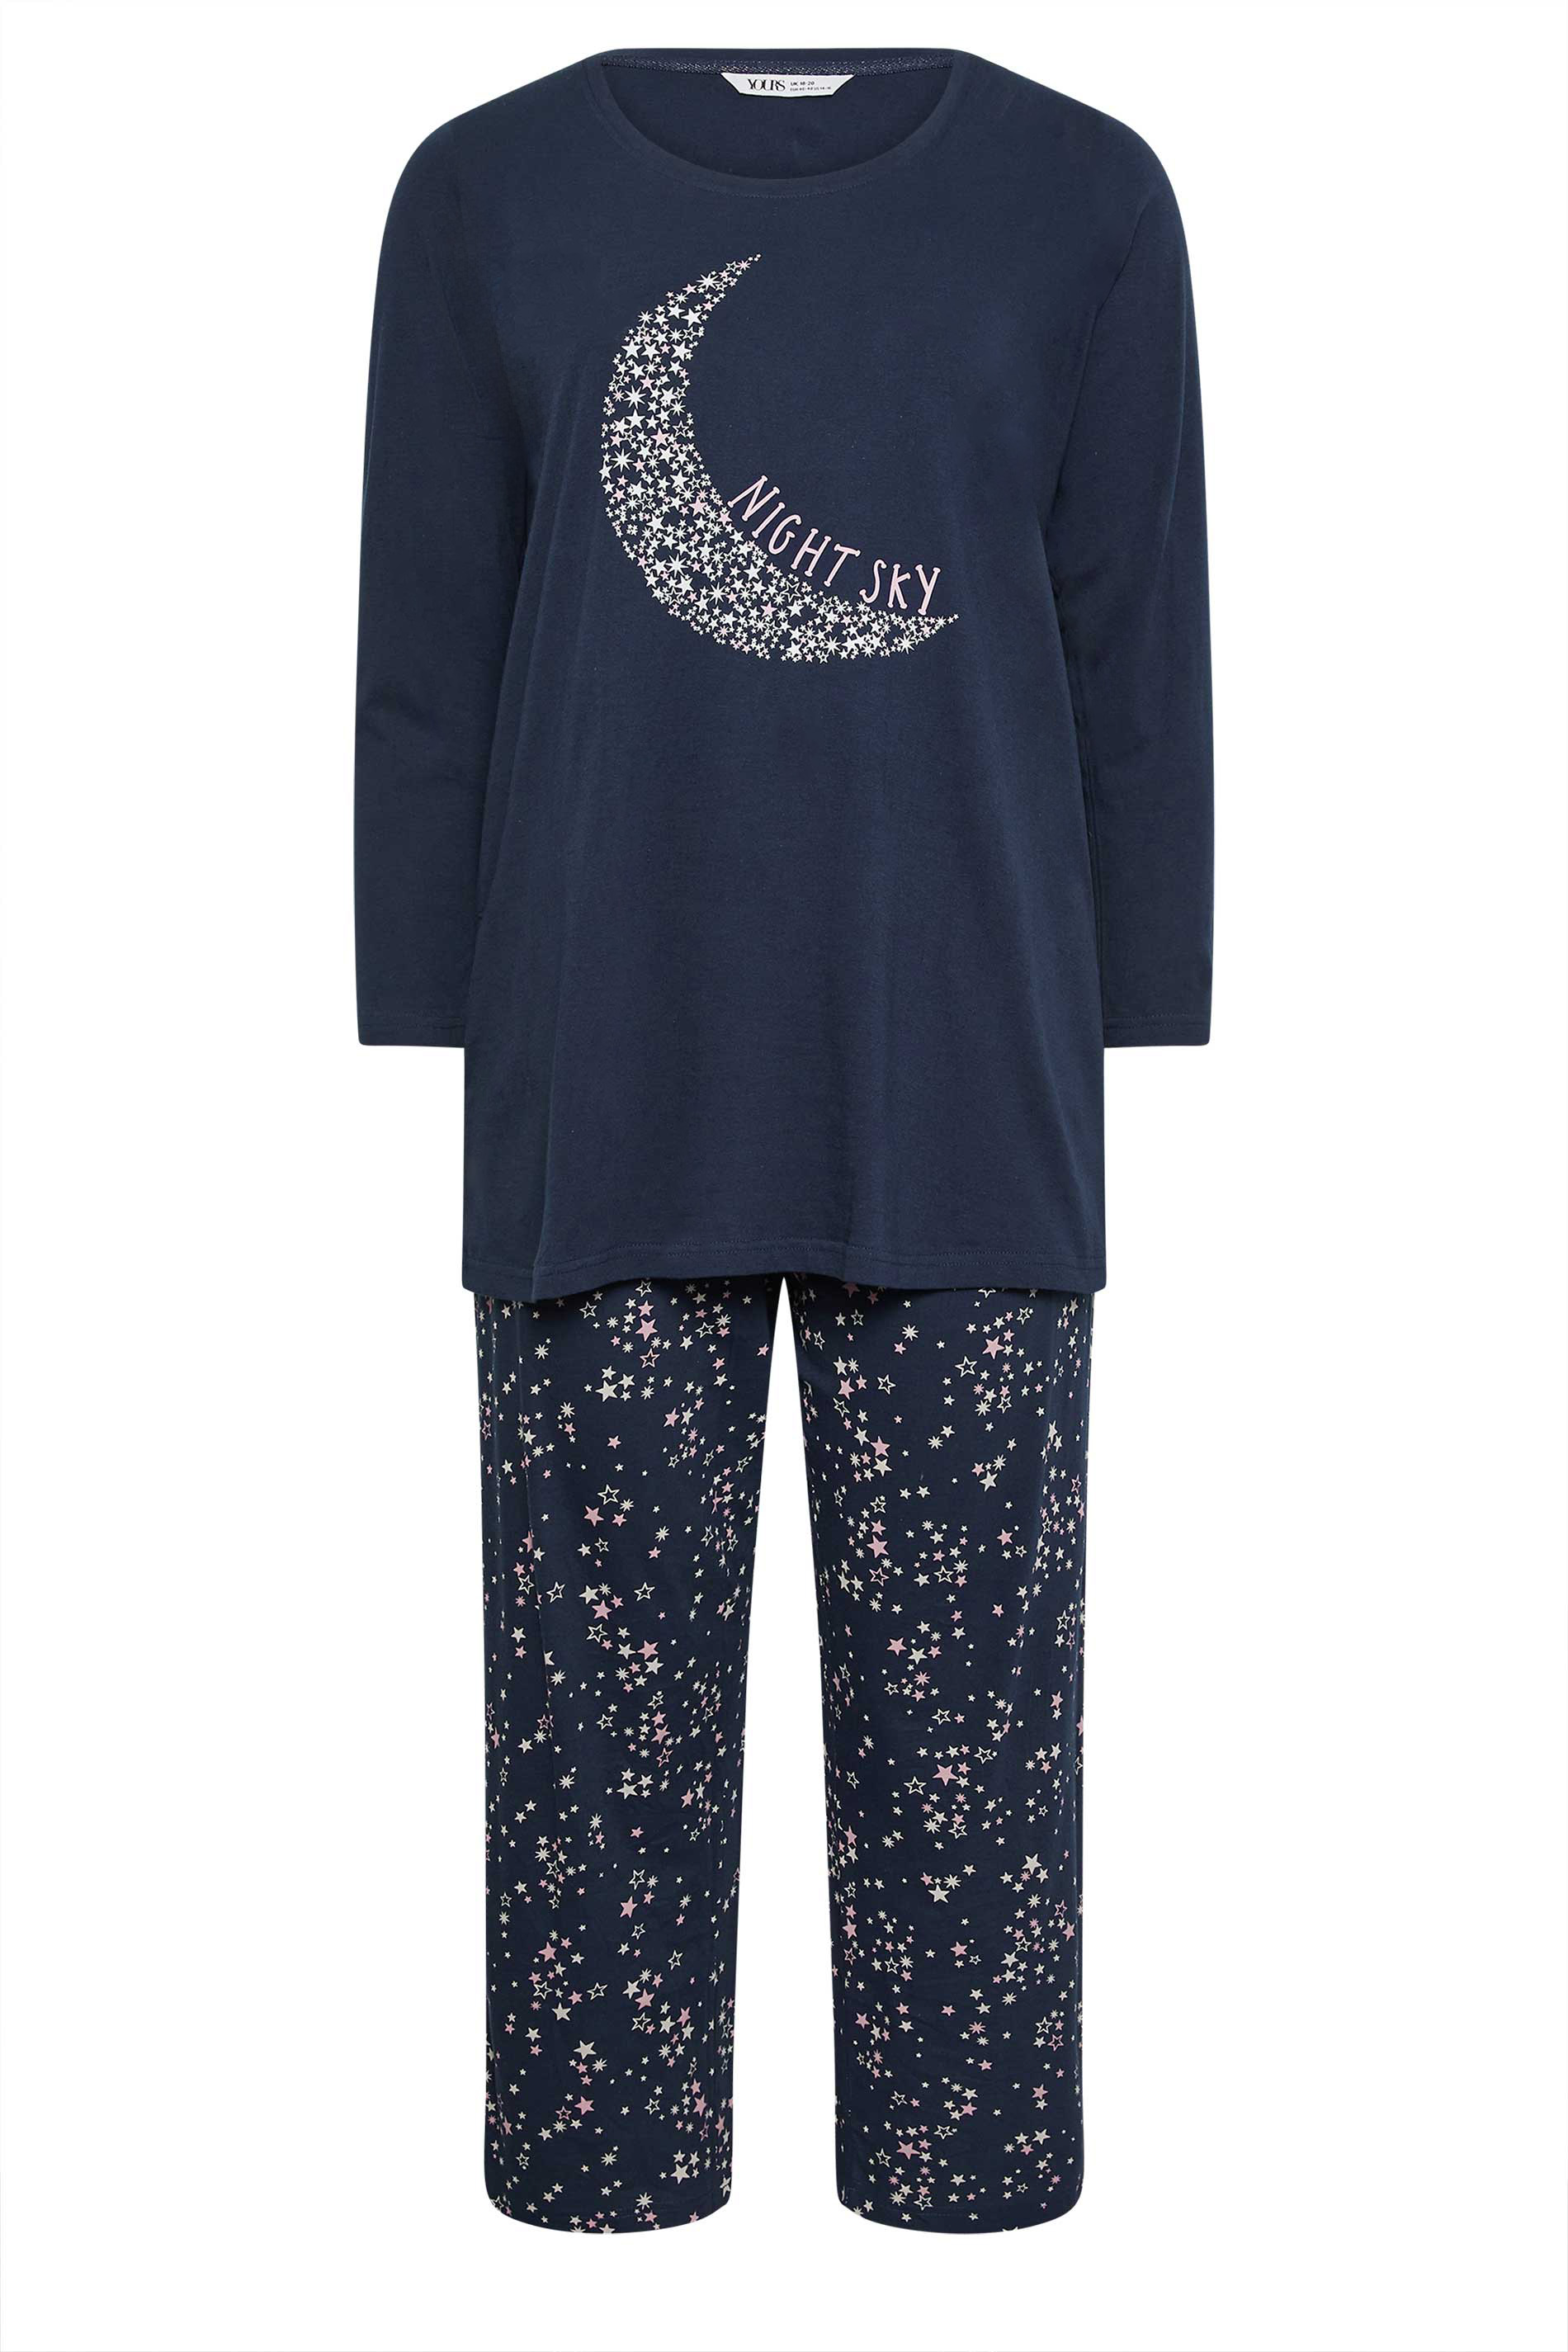 YOURS Curve Navy Blue Butterfly Mixed Print Cami Pyjama Top